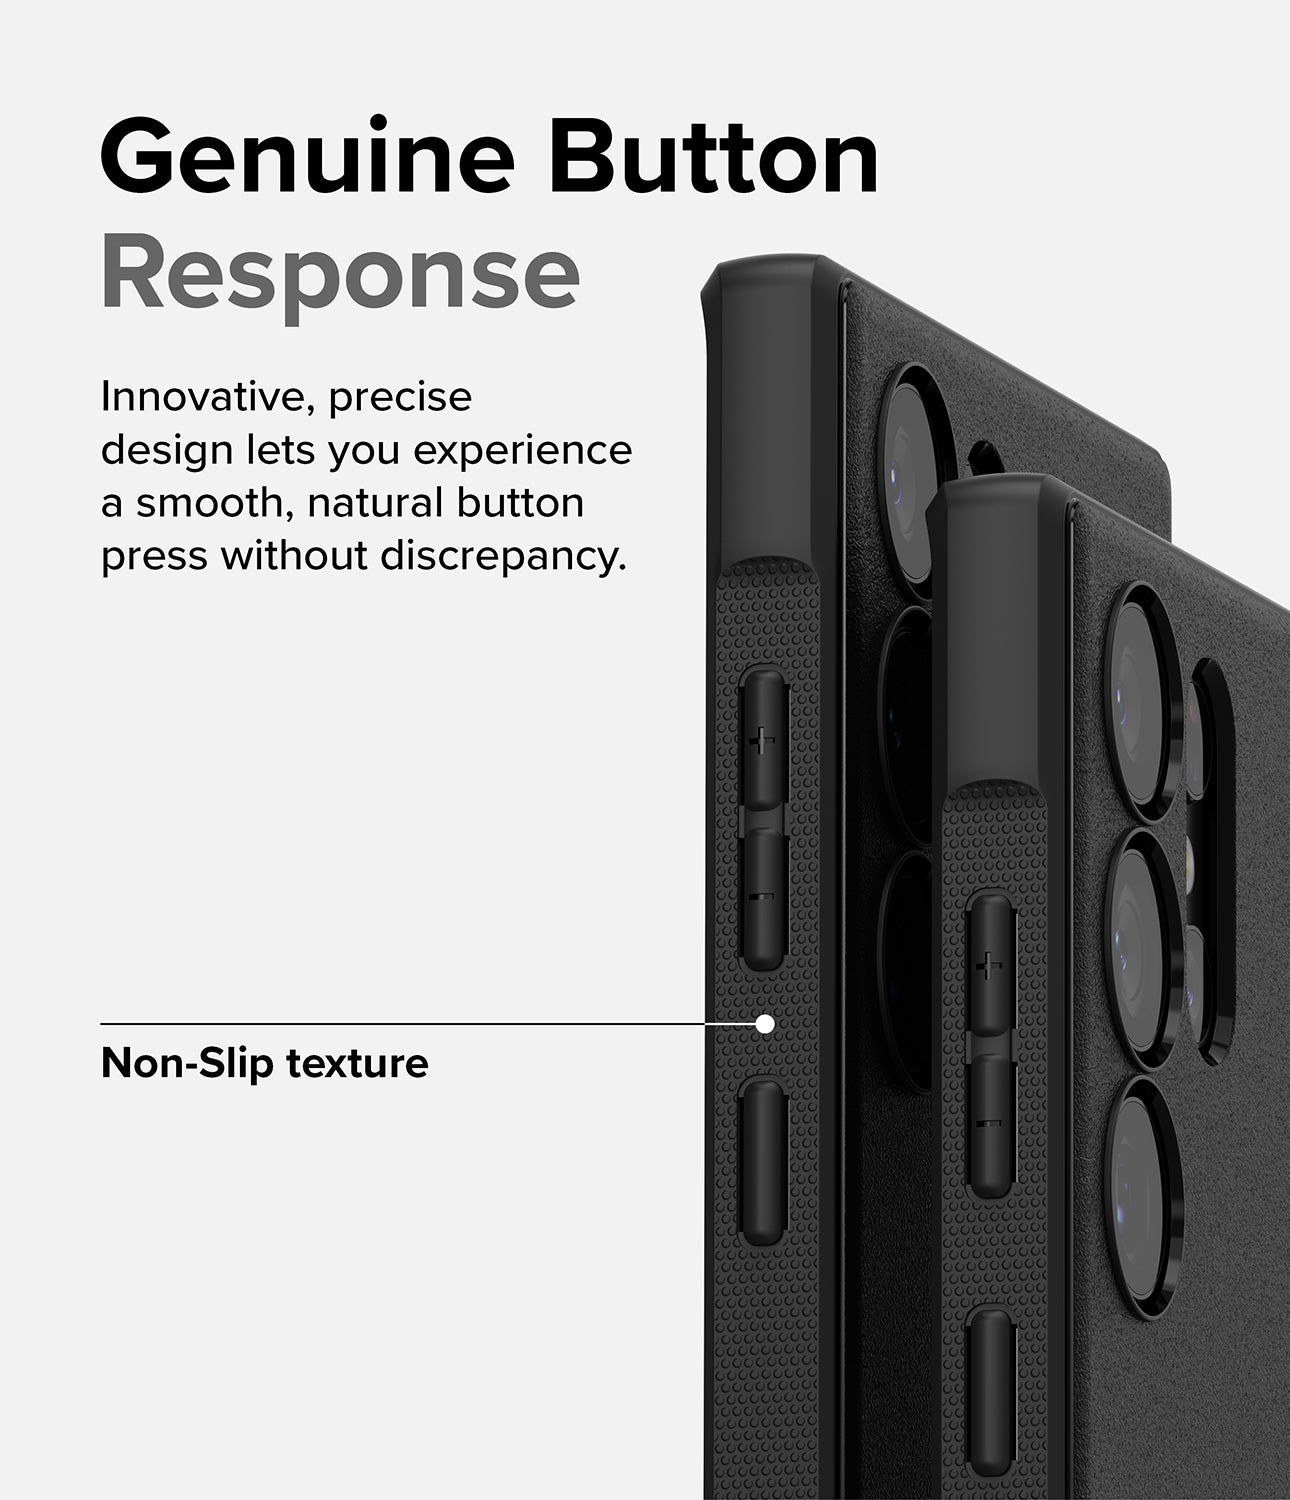 Galaxy S23 Ultra Case | Onyx - Black - Genuine Button Response. Innovative, precise design lets you experience a smooth, natural button press without discrepancy. Non-Slip texture.